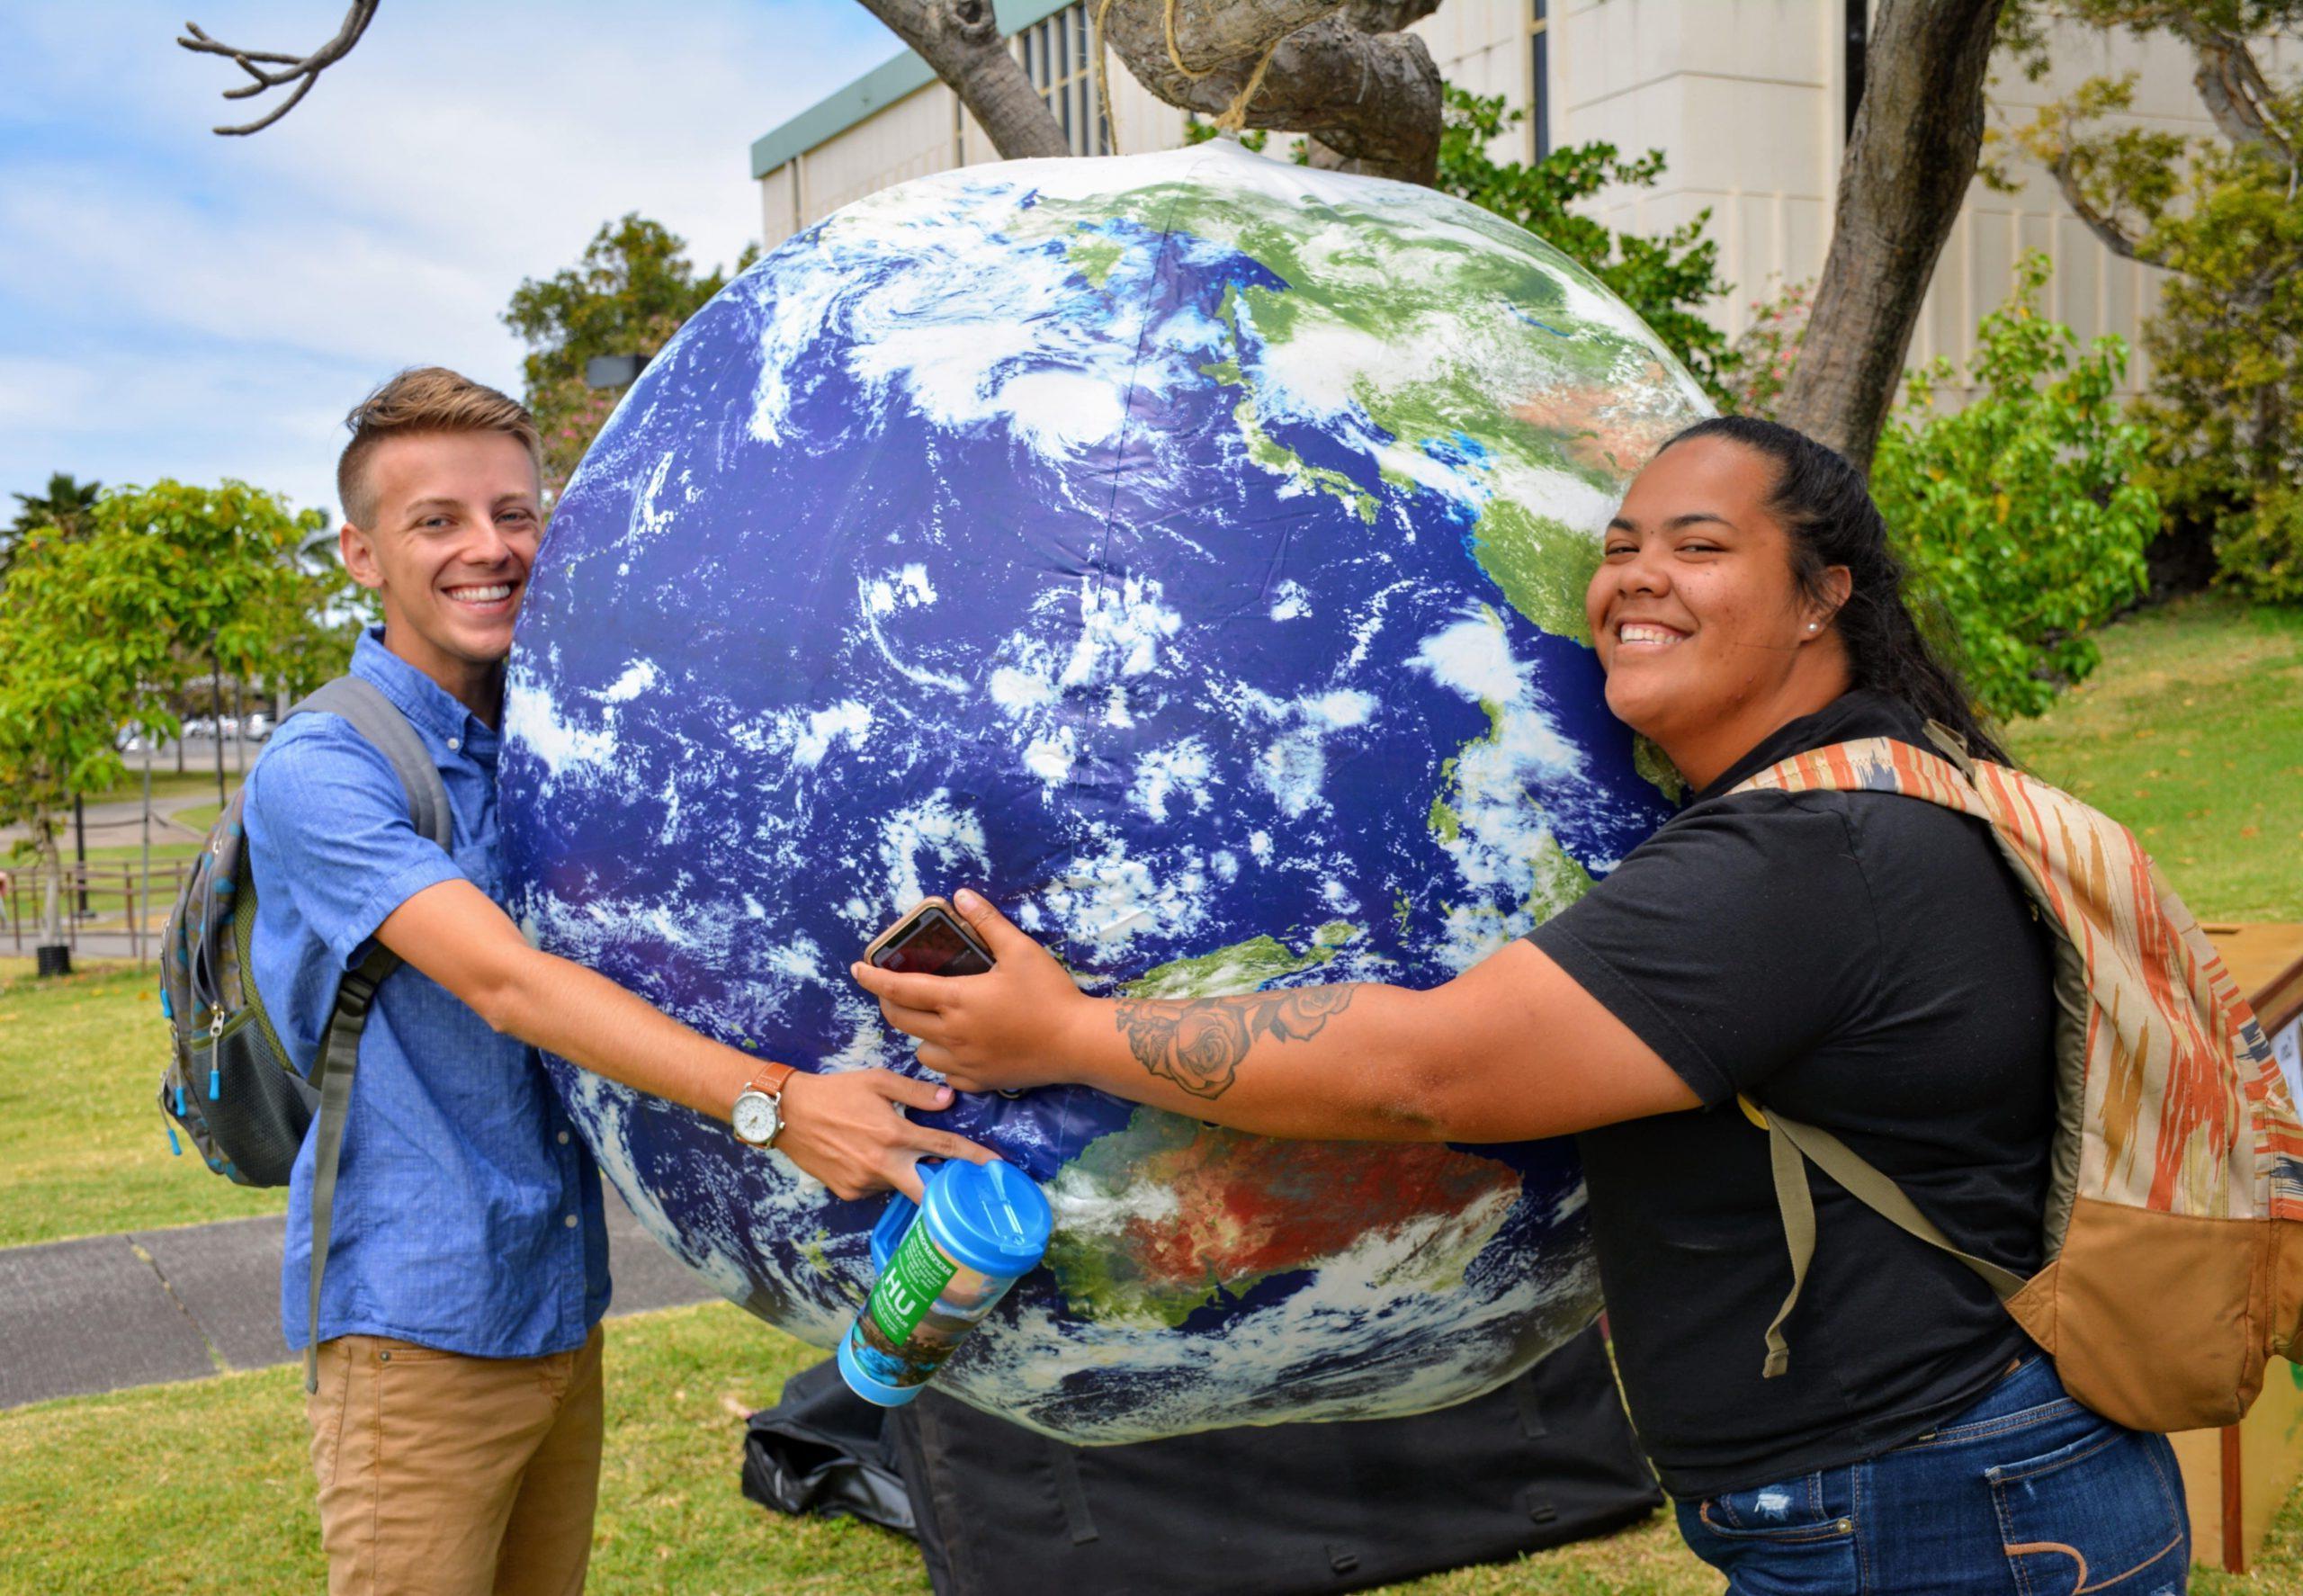 Two students hugging a inflatable globe